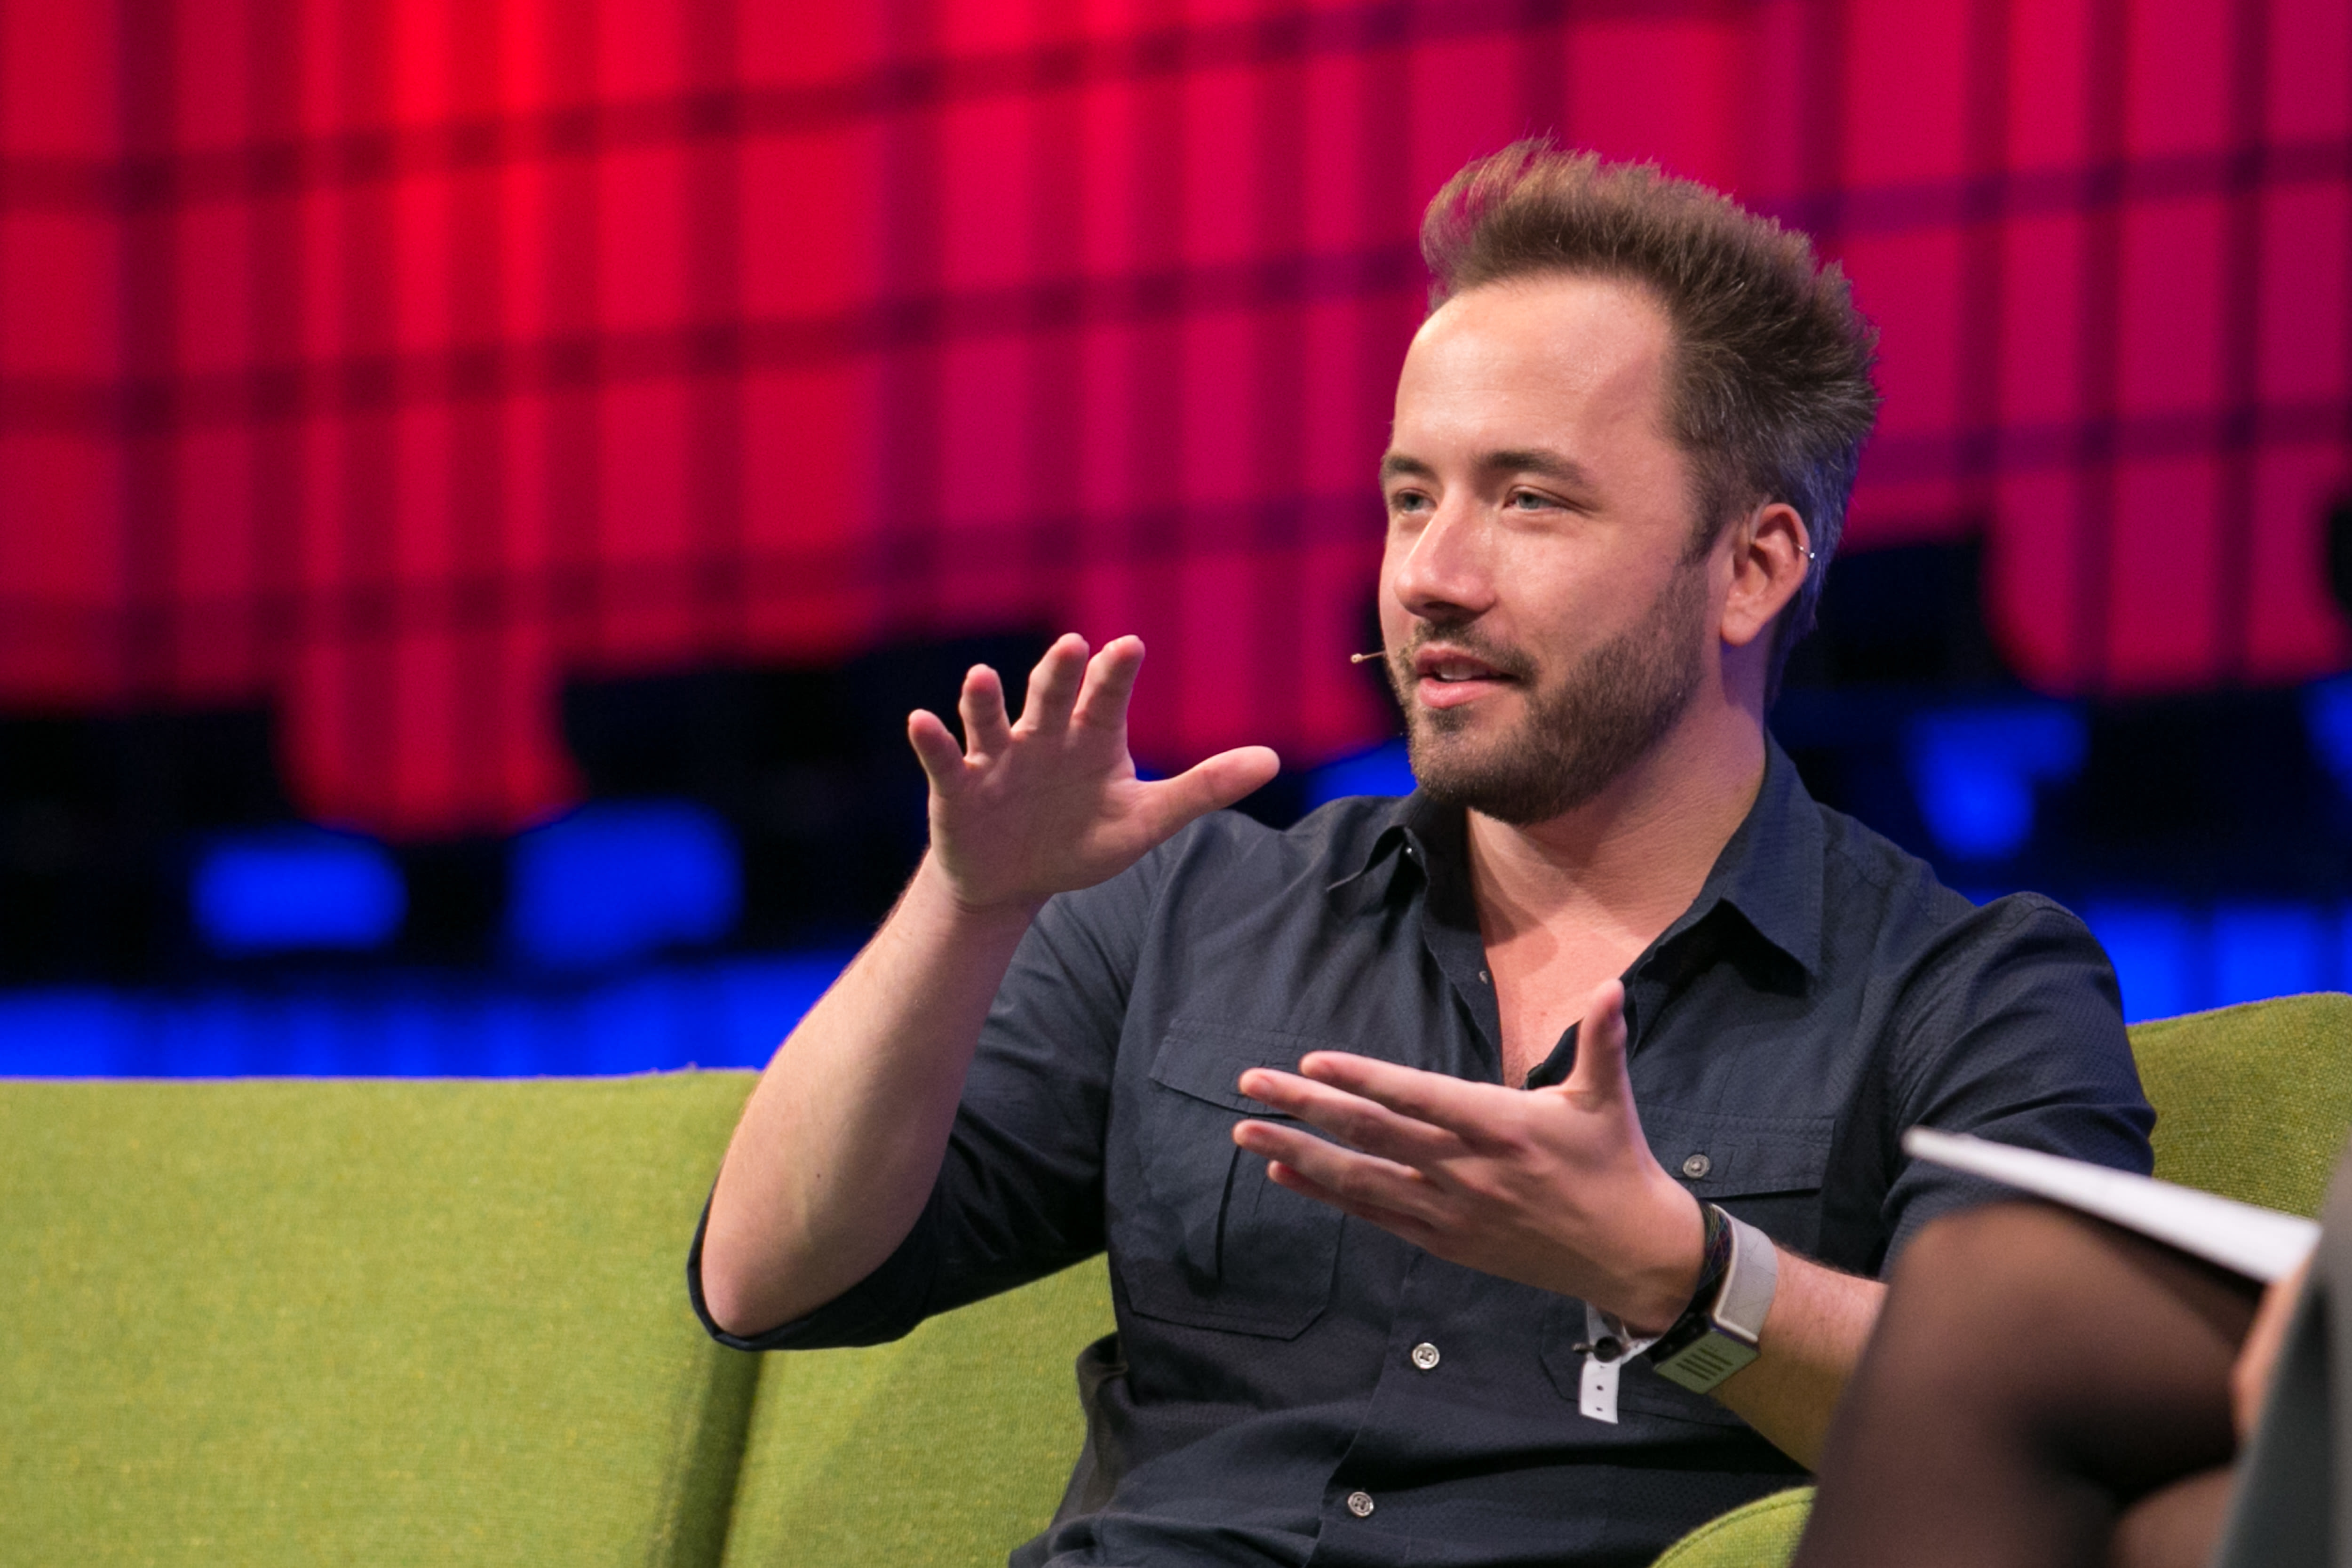 Dropbox shares trend higher on solid earnings and revenue beat - SiliconANGLE